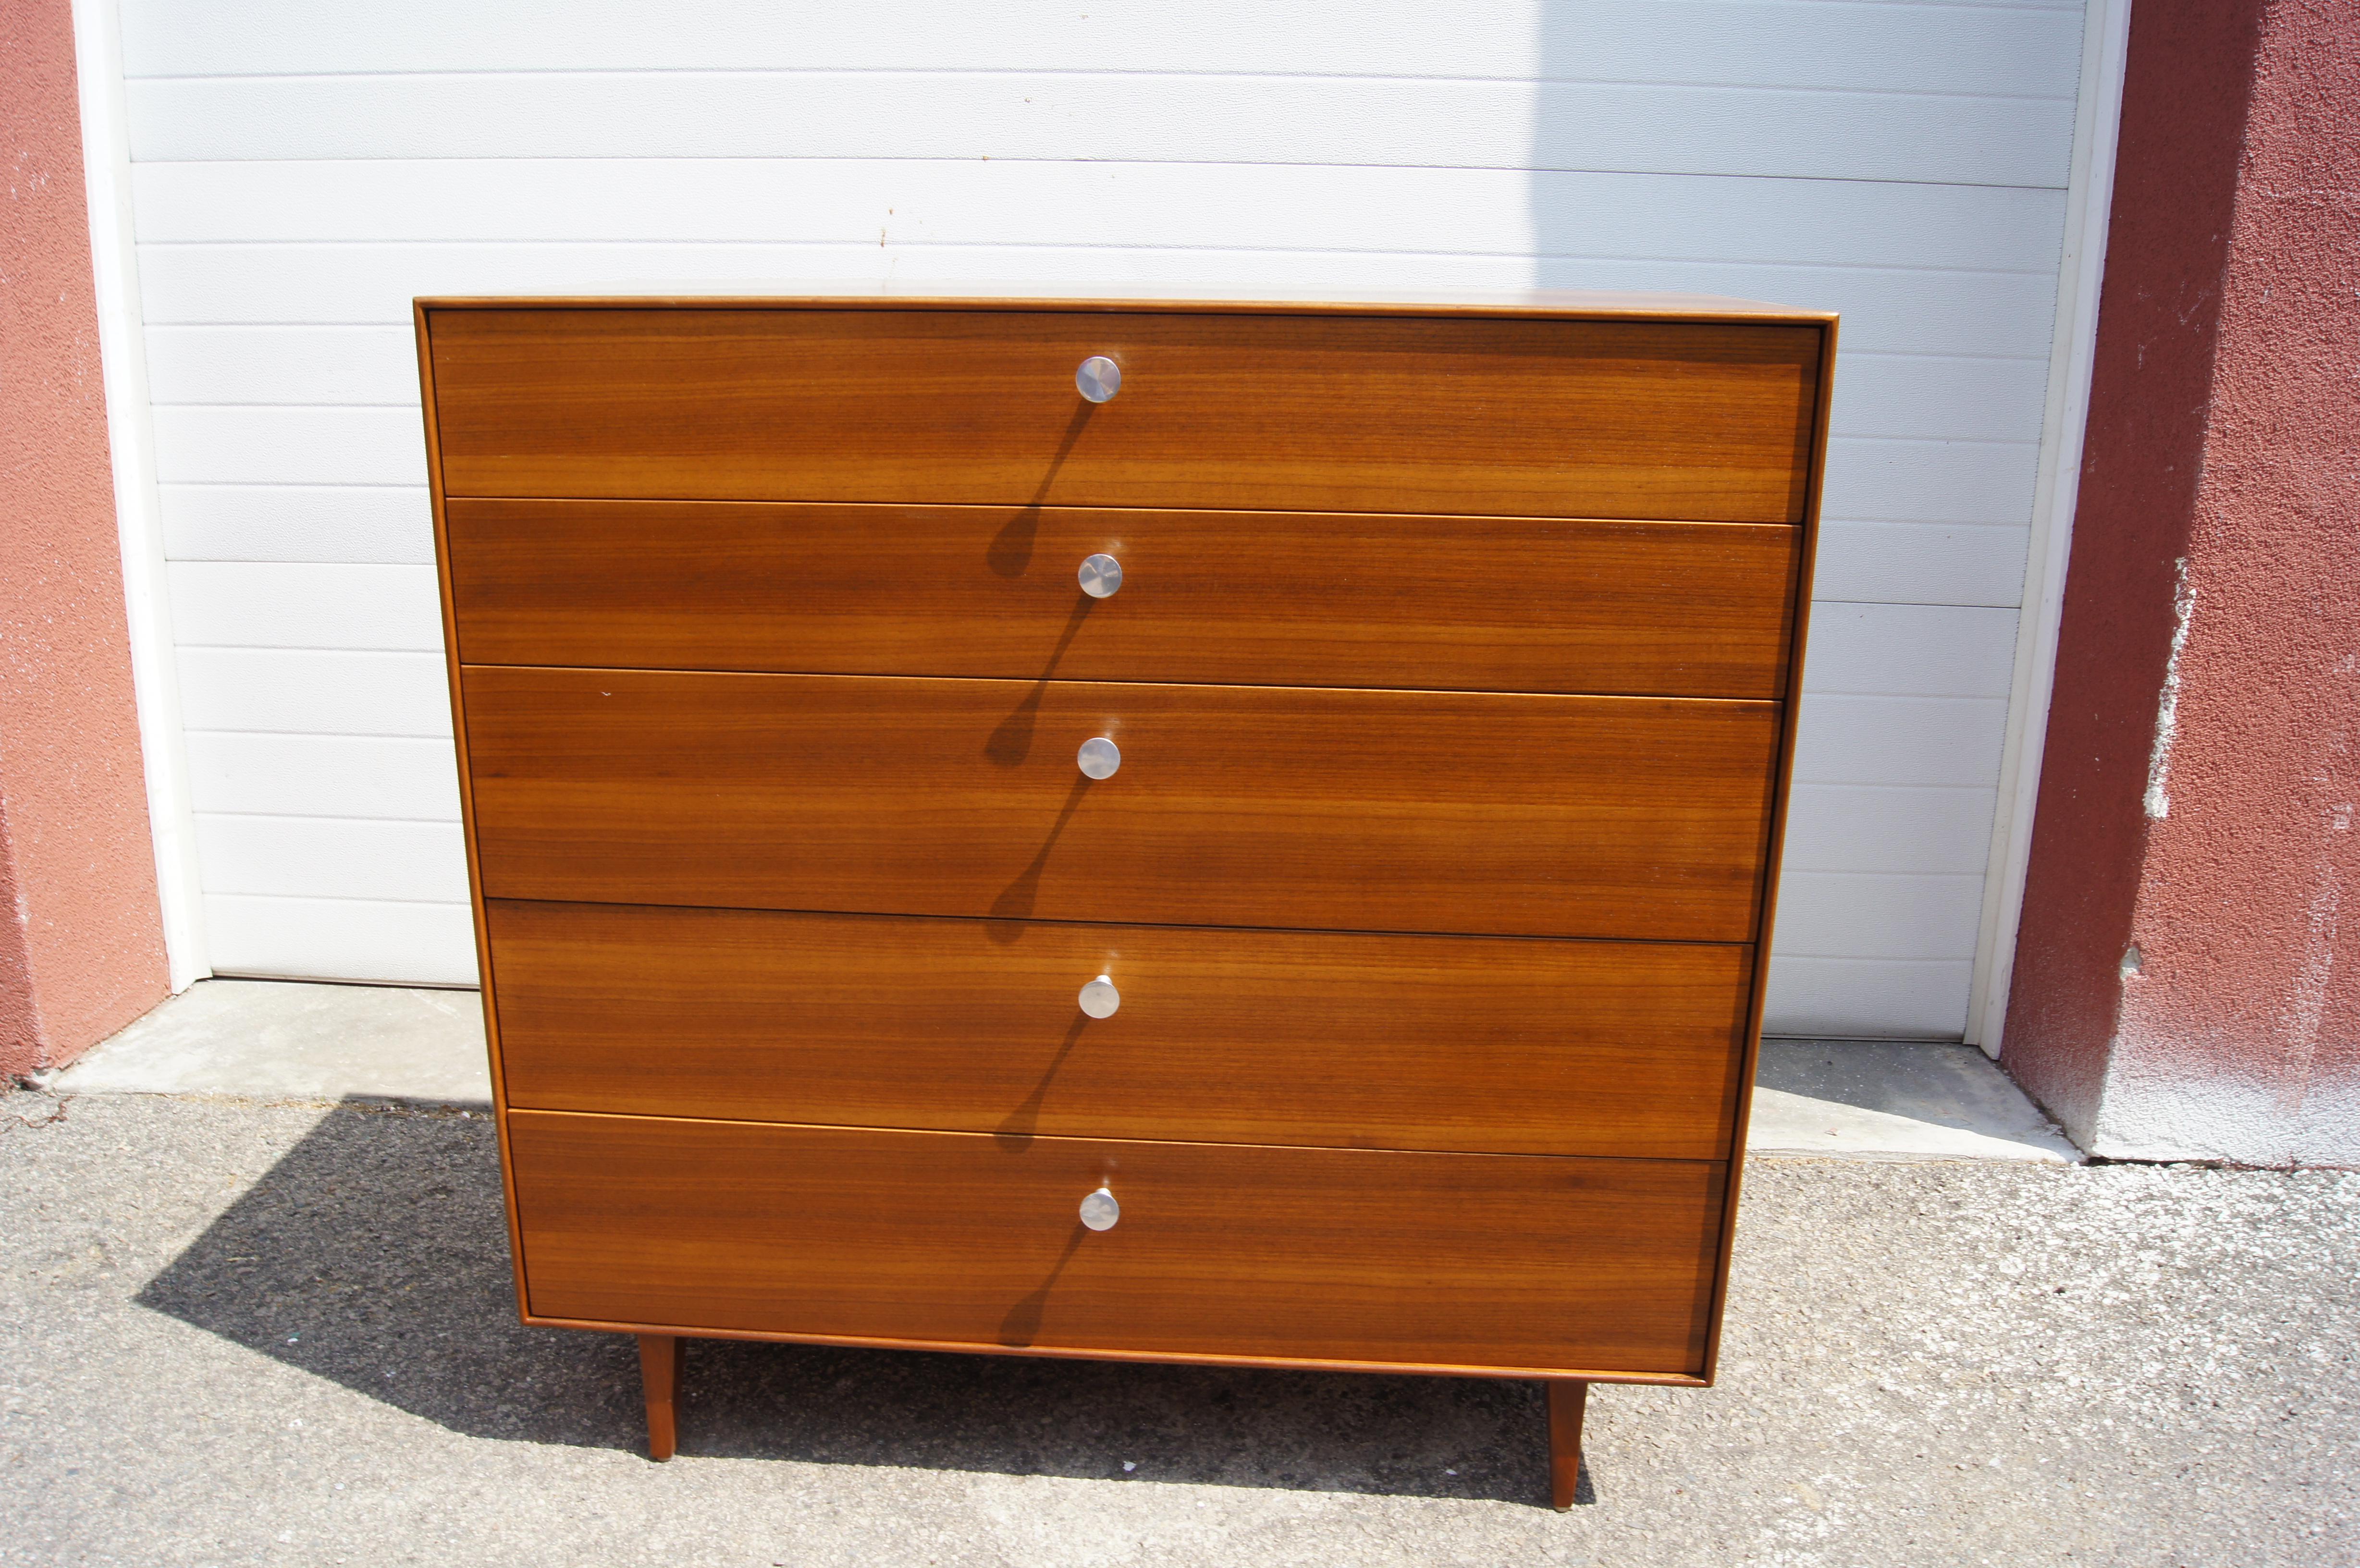 This gorgeous dresser is part of George Nelson's 1950s Thin Edge collection for Herman Miller, which takes its name from the elegant, slim profile. Tapered trestle legs elevate the walnut case, whose five drawers, three deeper at bottom and two